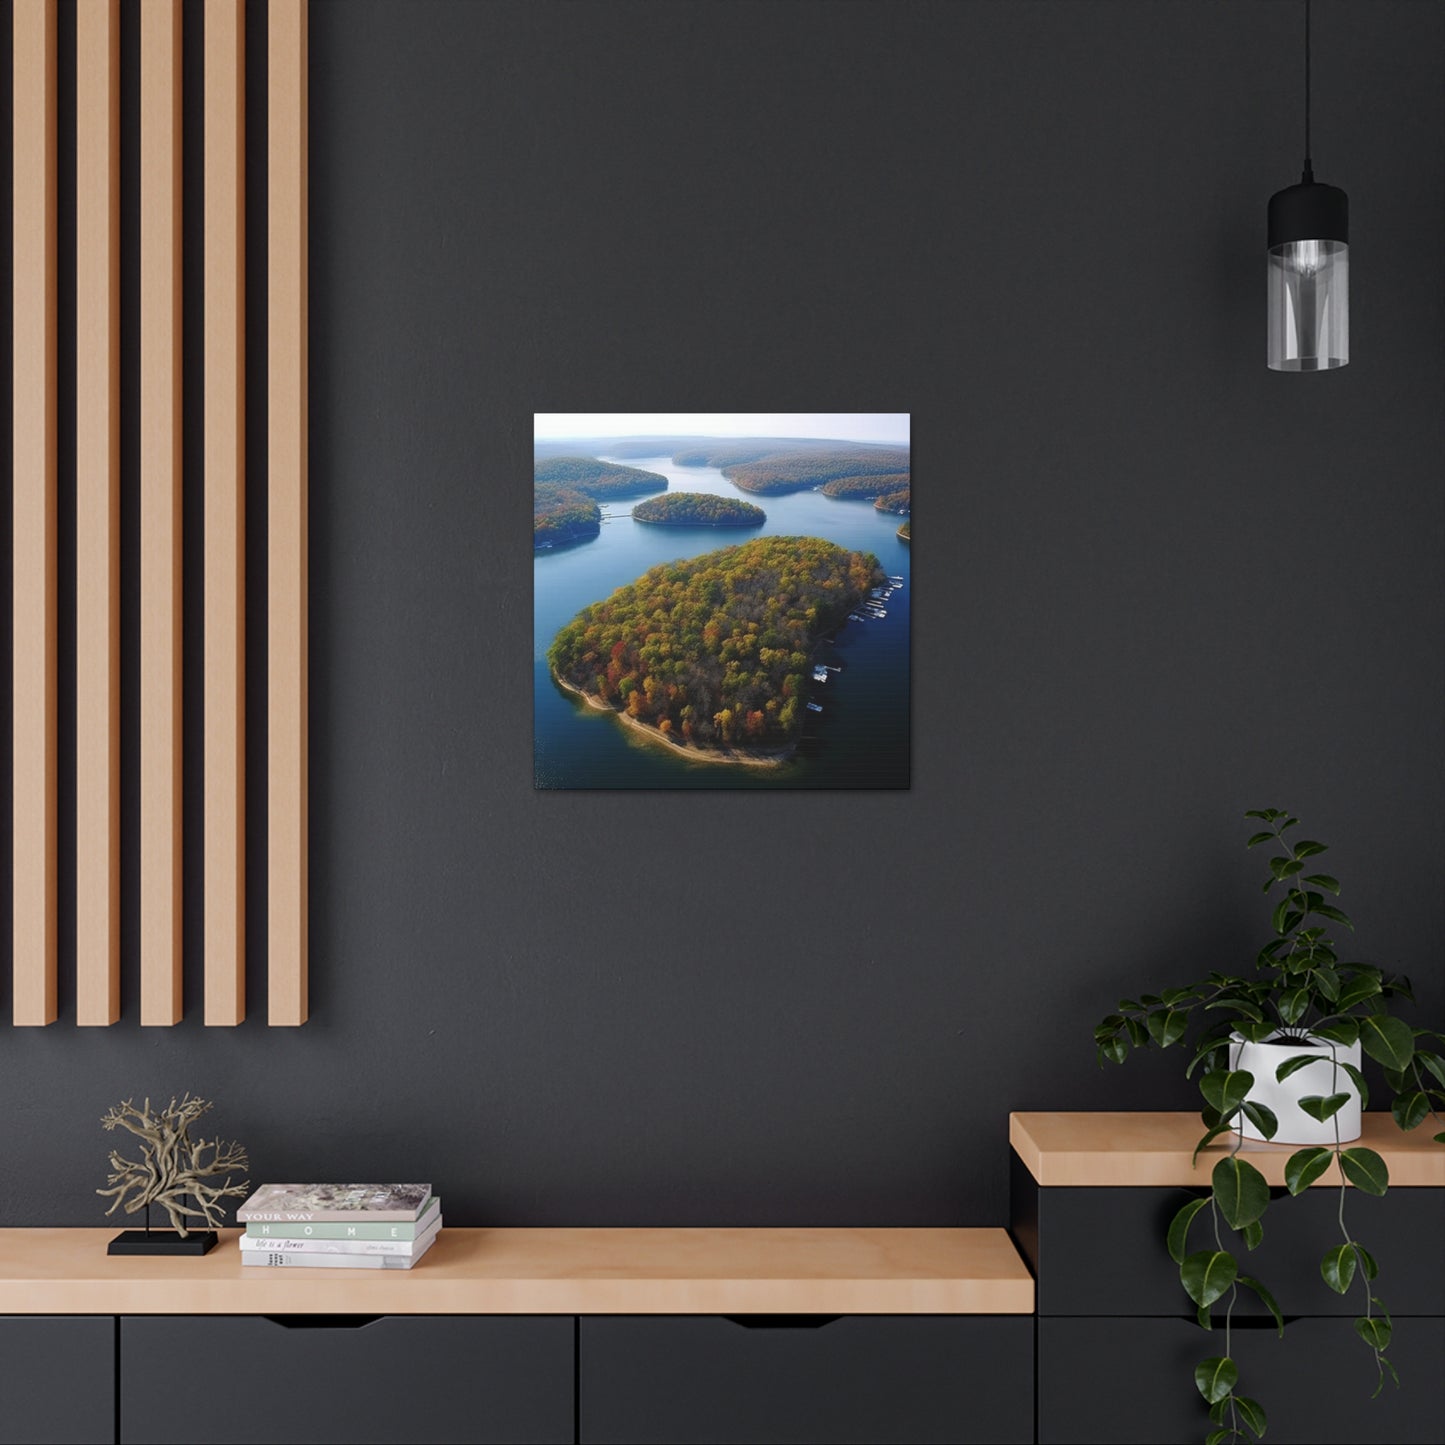 "Lake Of The Ozarks" Photo Canvas Wall Art - Weave Got Gifts - Unique Gifts You Won’t Find Anywhere Else!